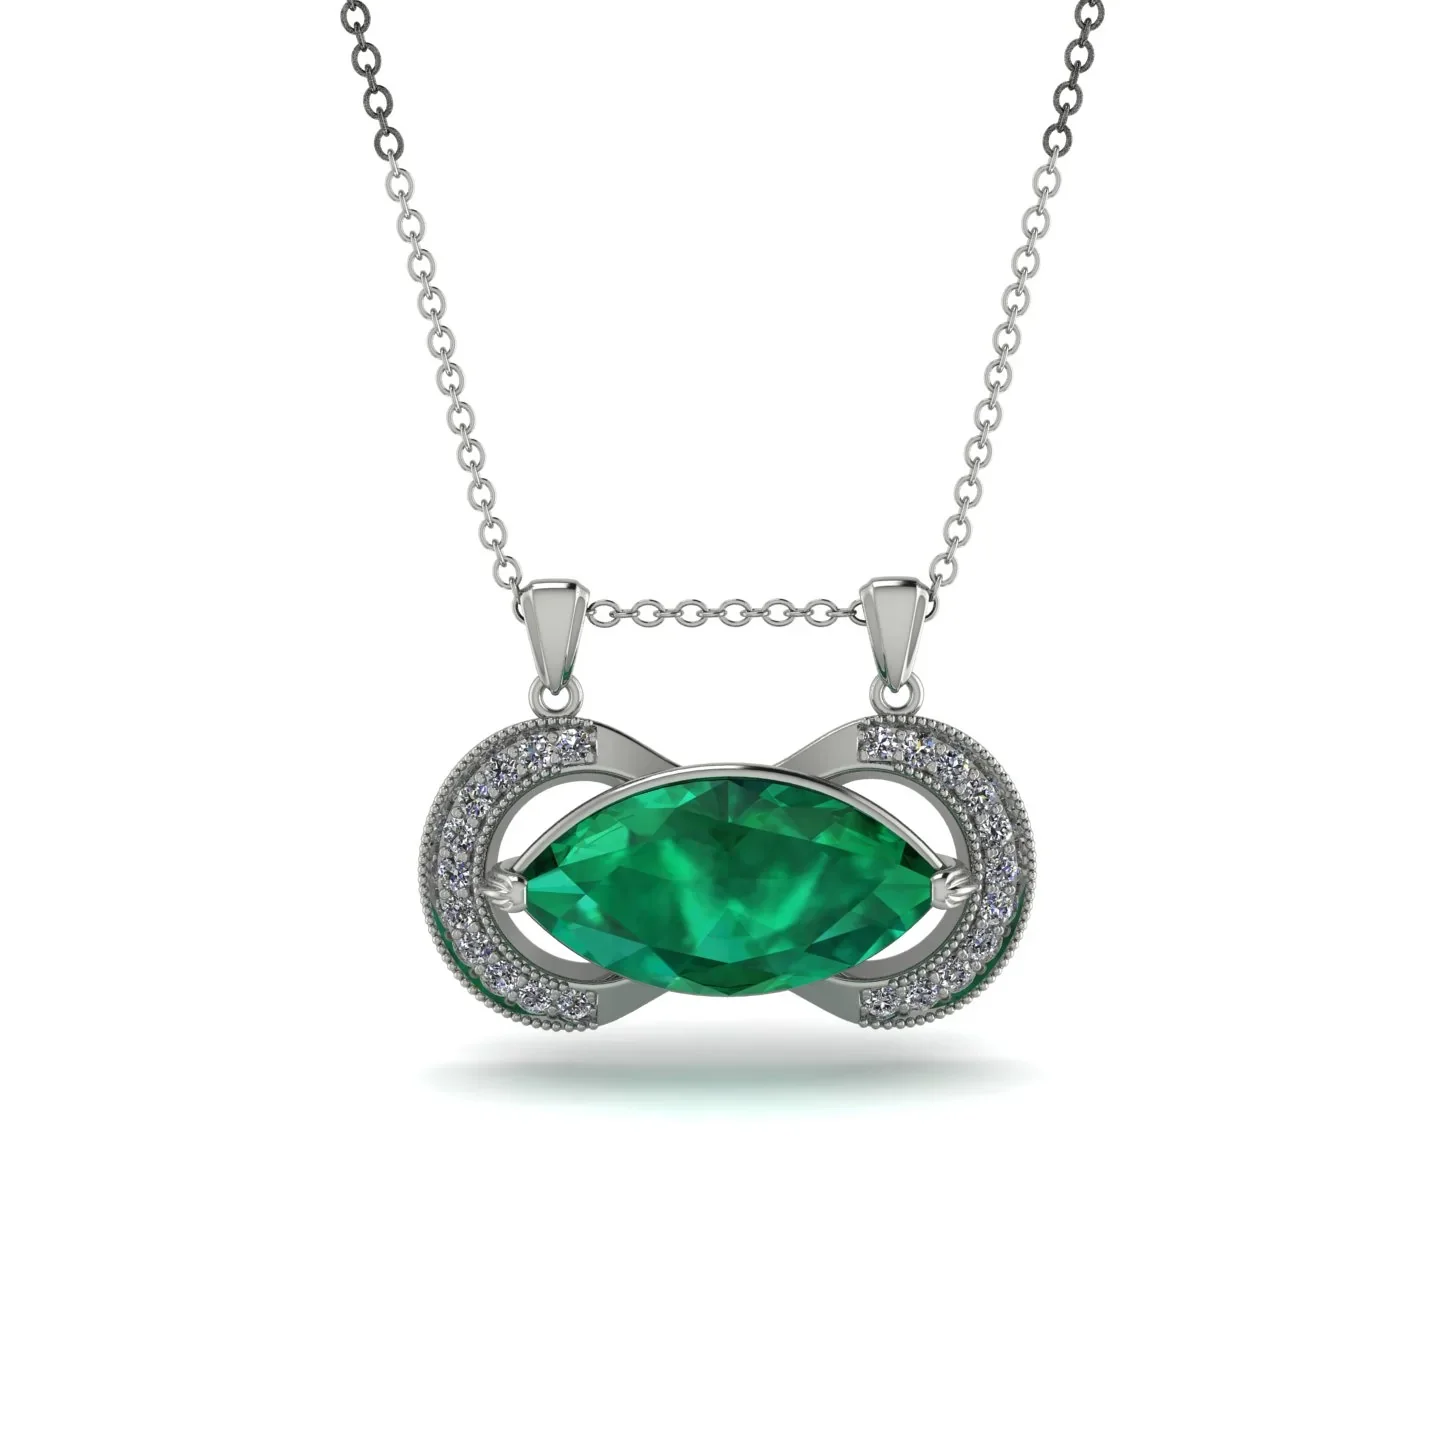 Image of Marquise Vintage Emerald Necklace - Marley No. 6